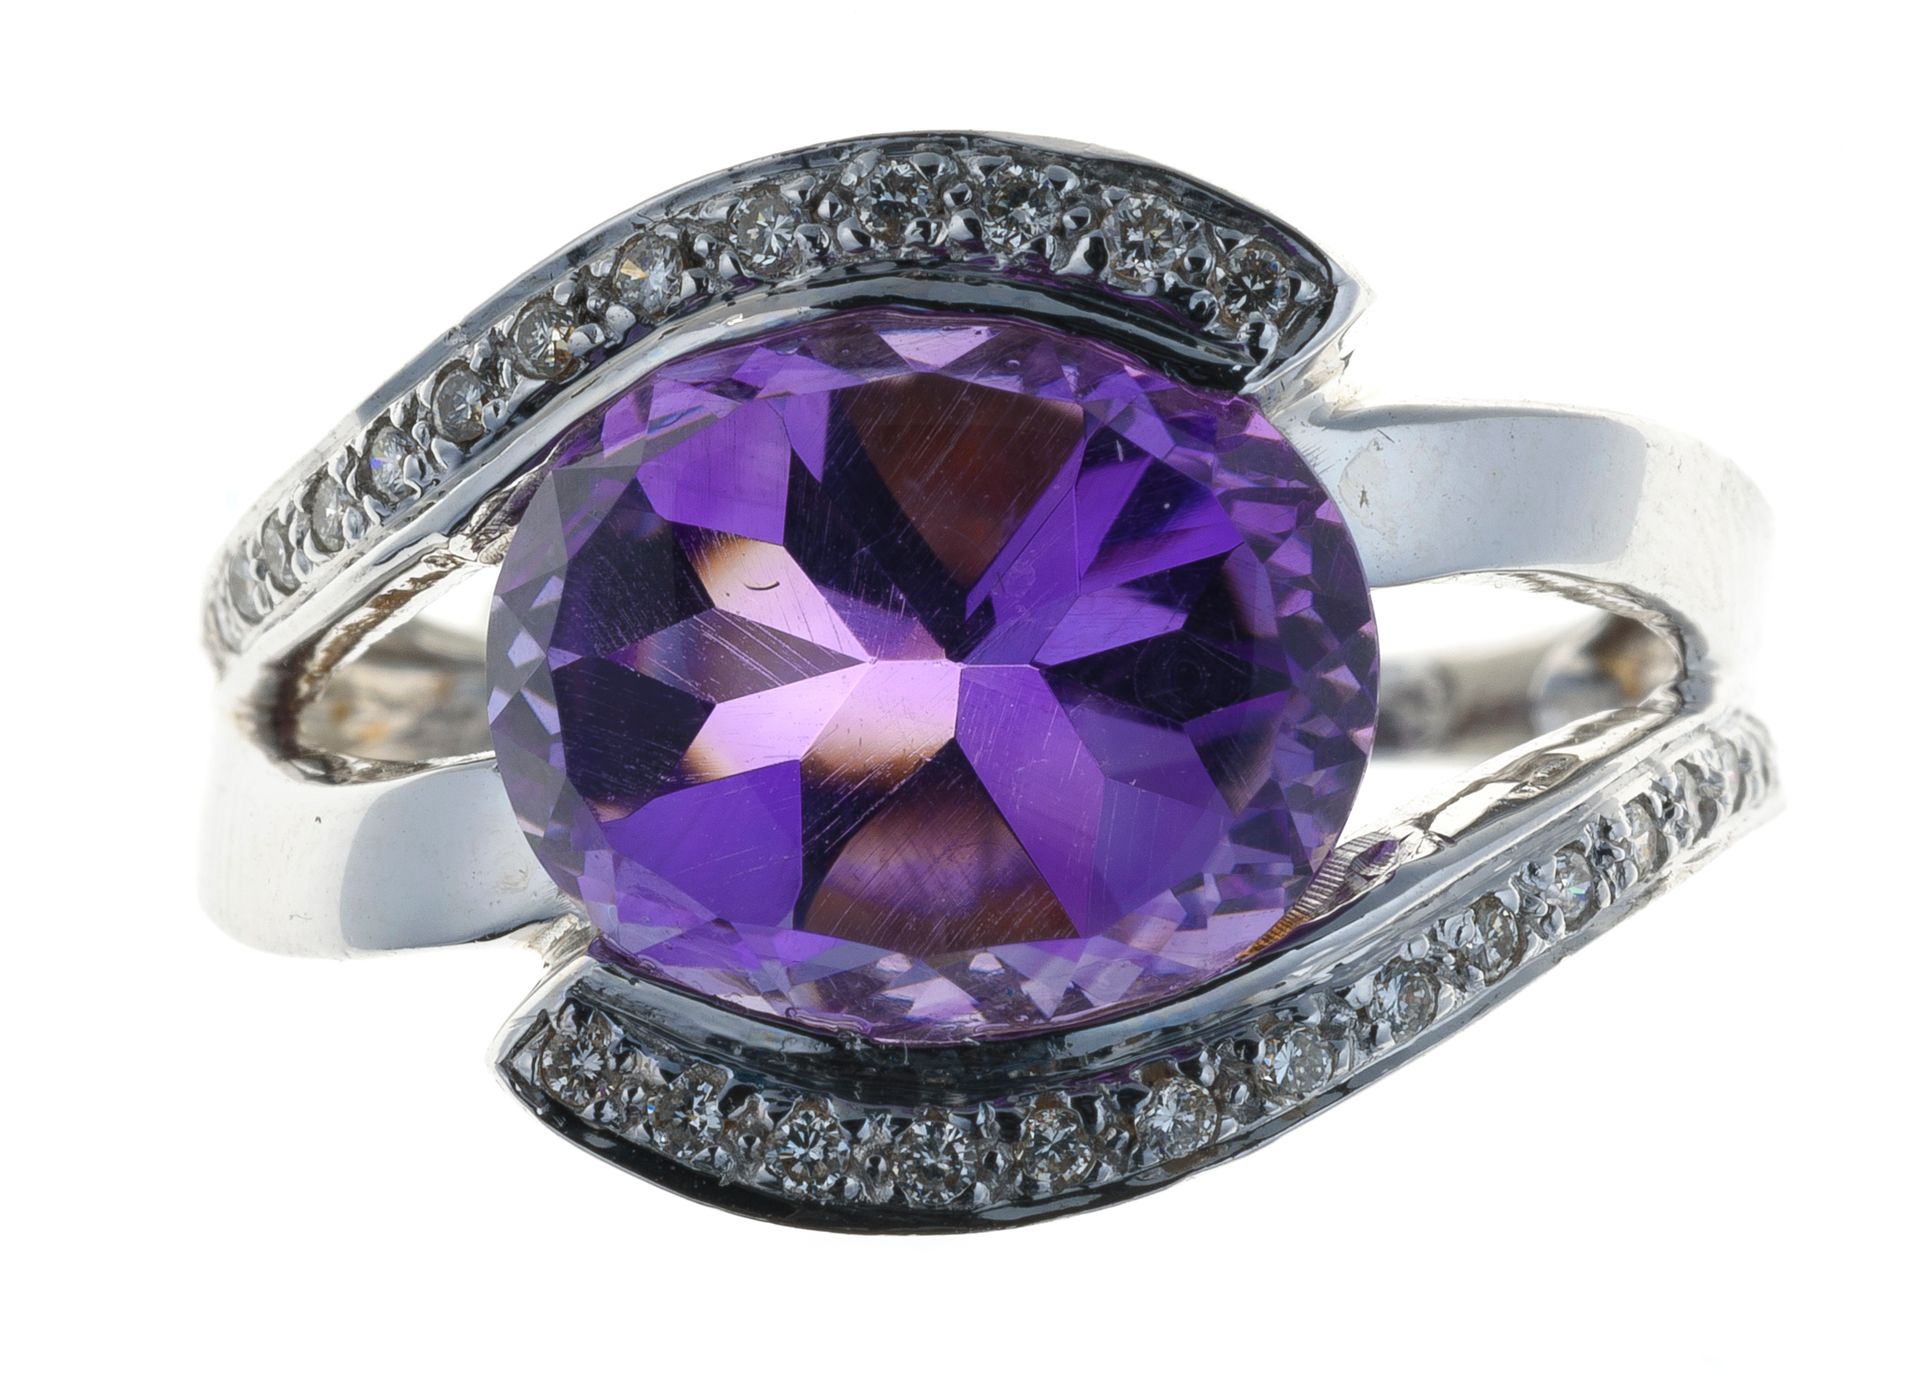 Null White gold ring set with a large oval cut amethyst weighing approximately 5&hellip;